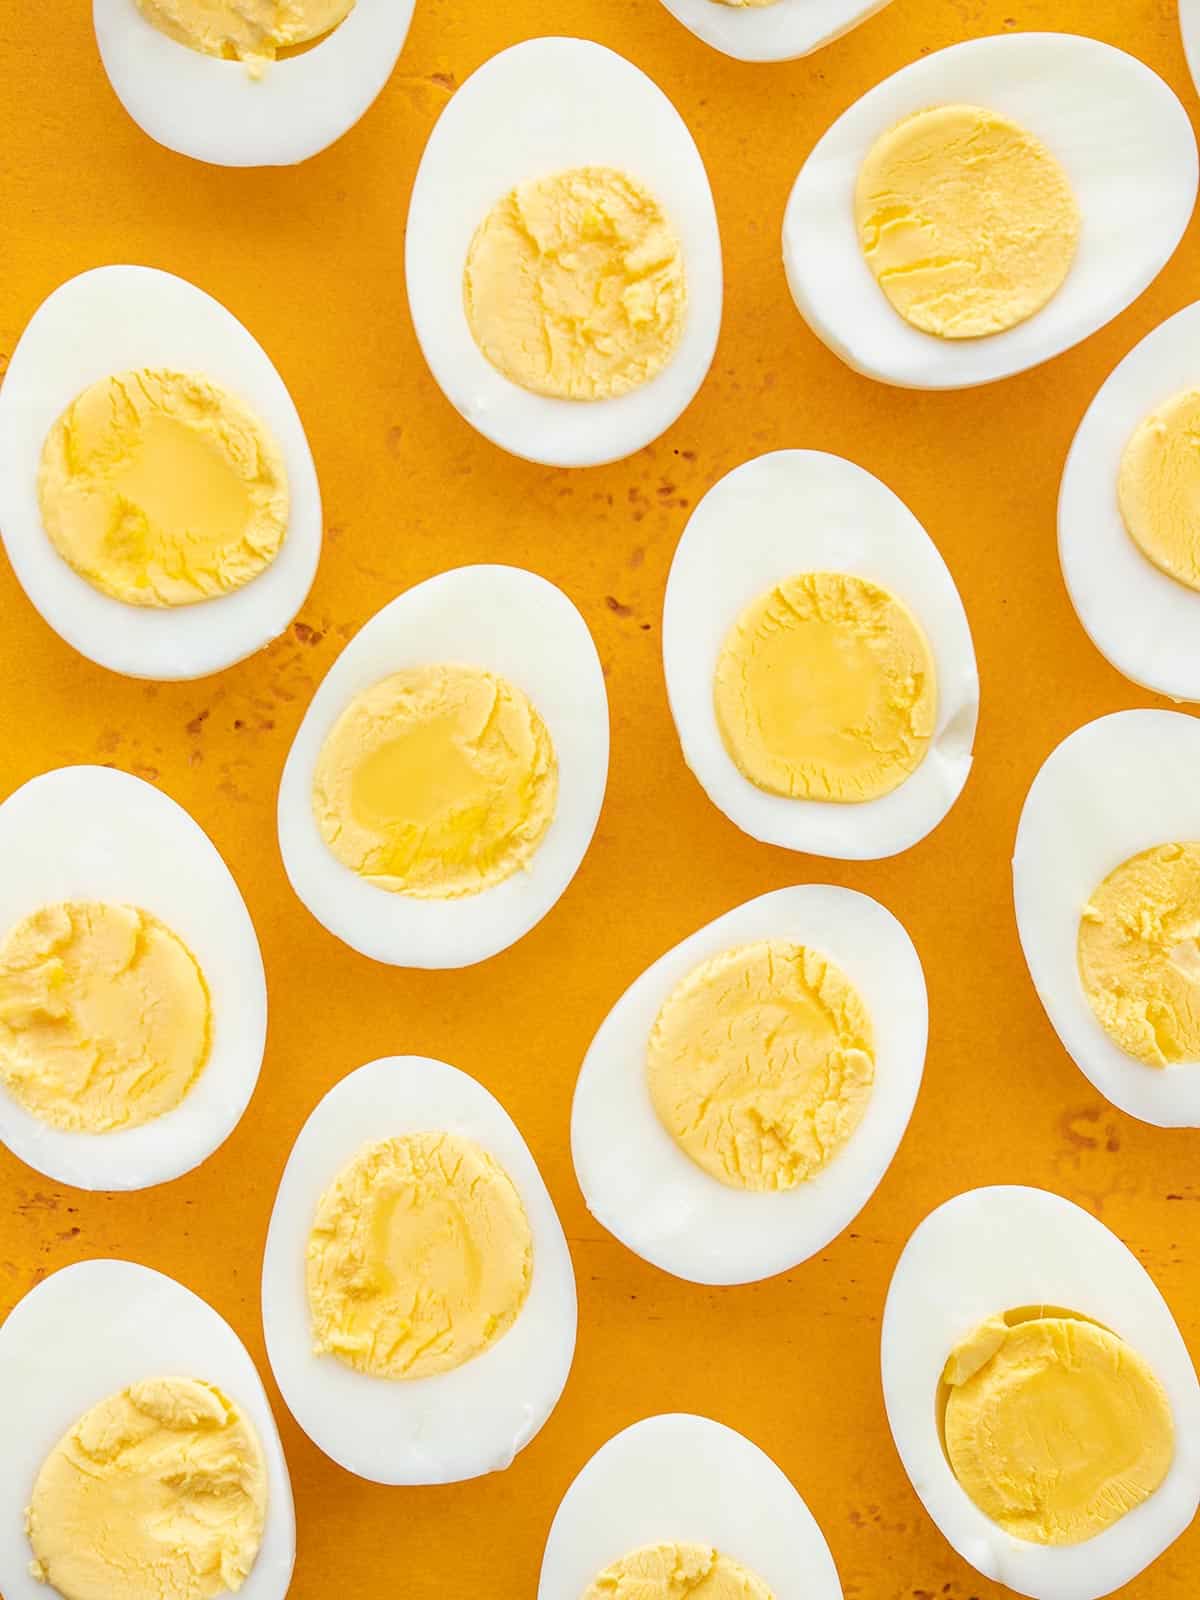 Several hard boiled eggs cut in half against a yellow background